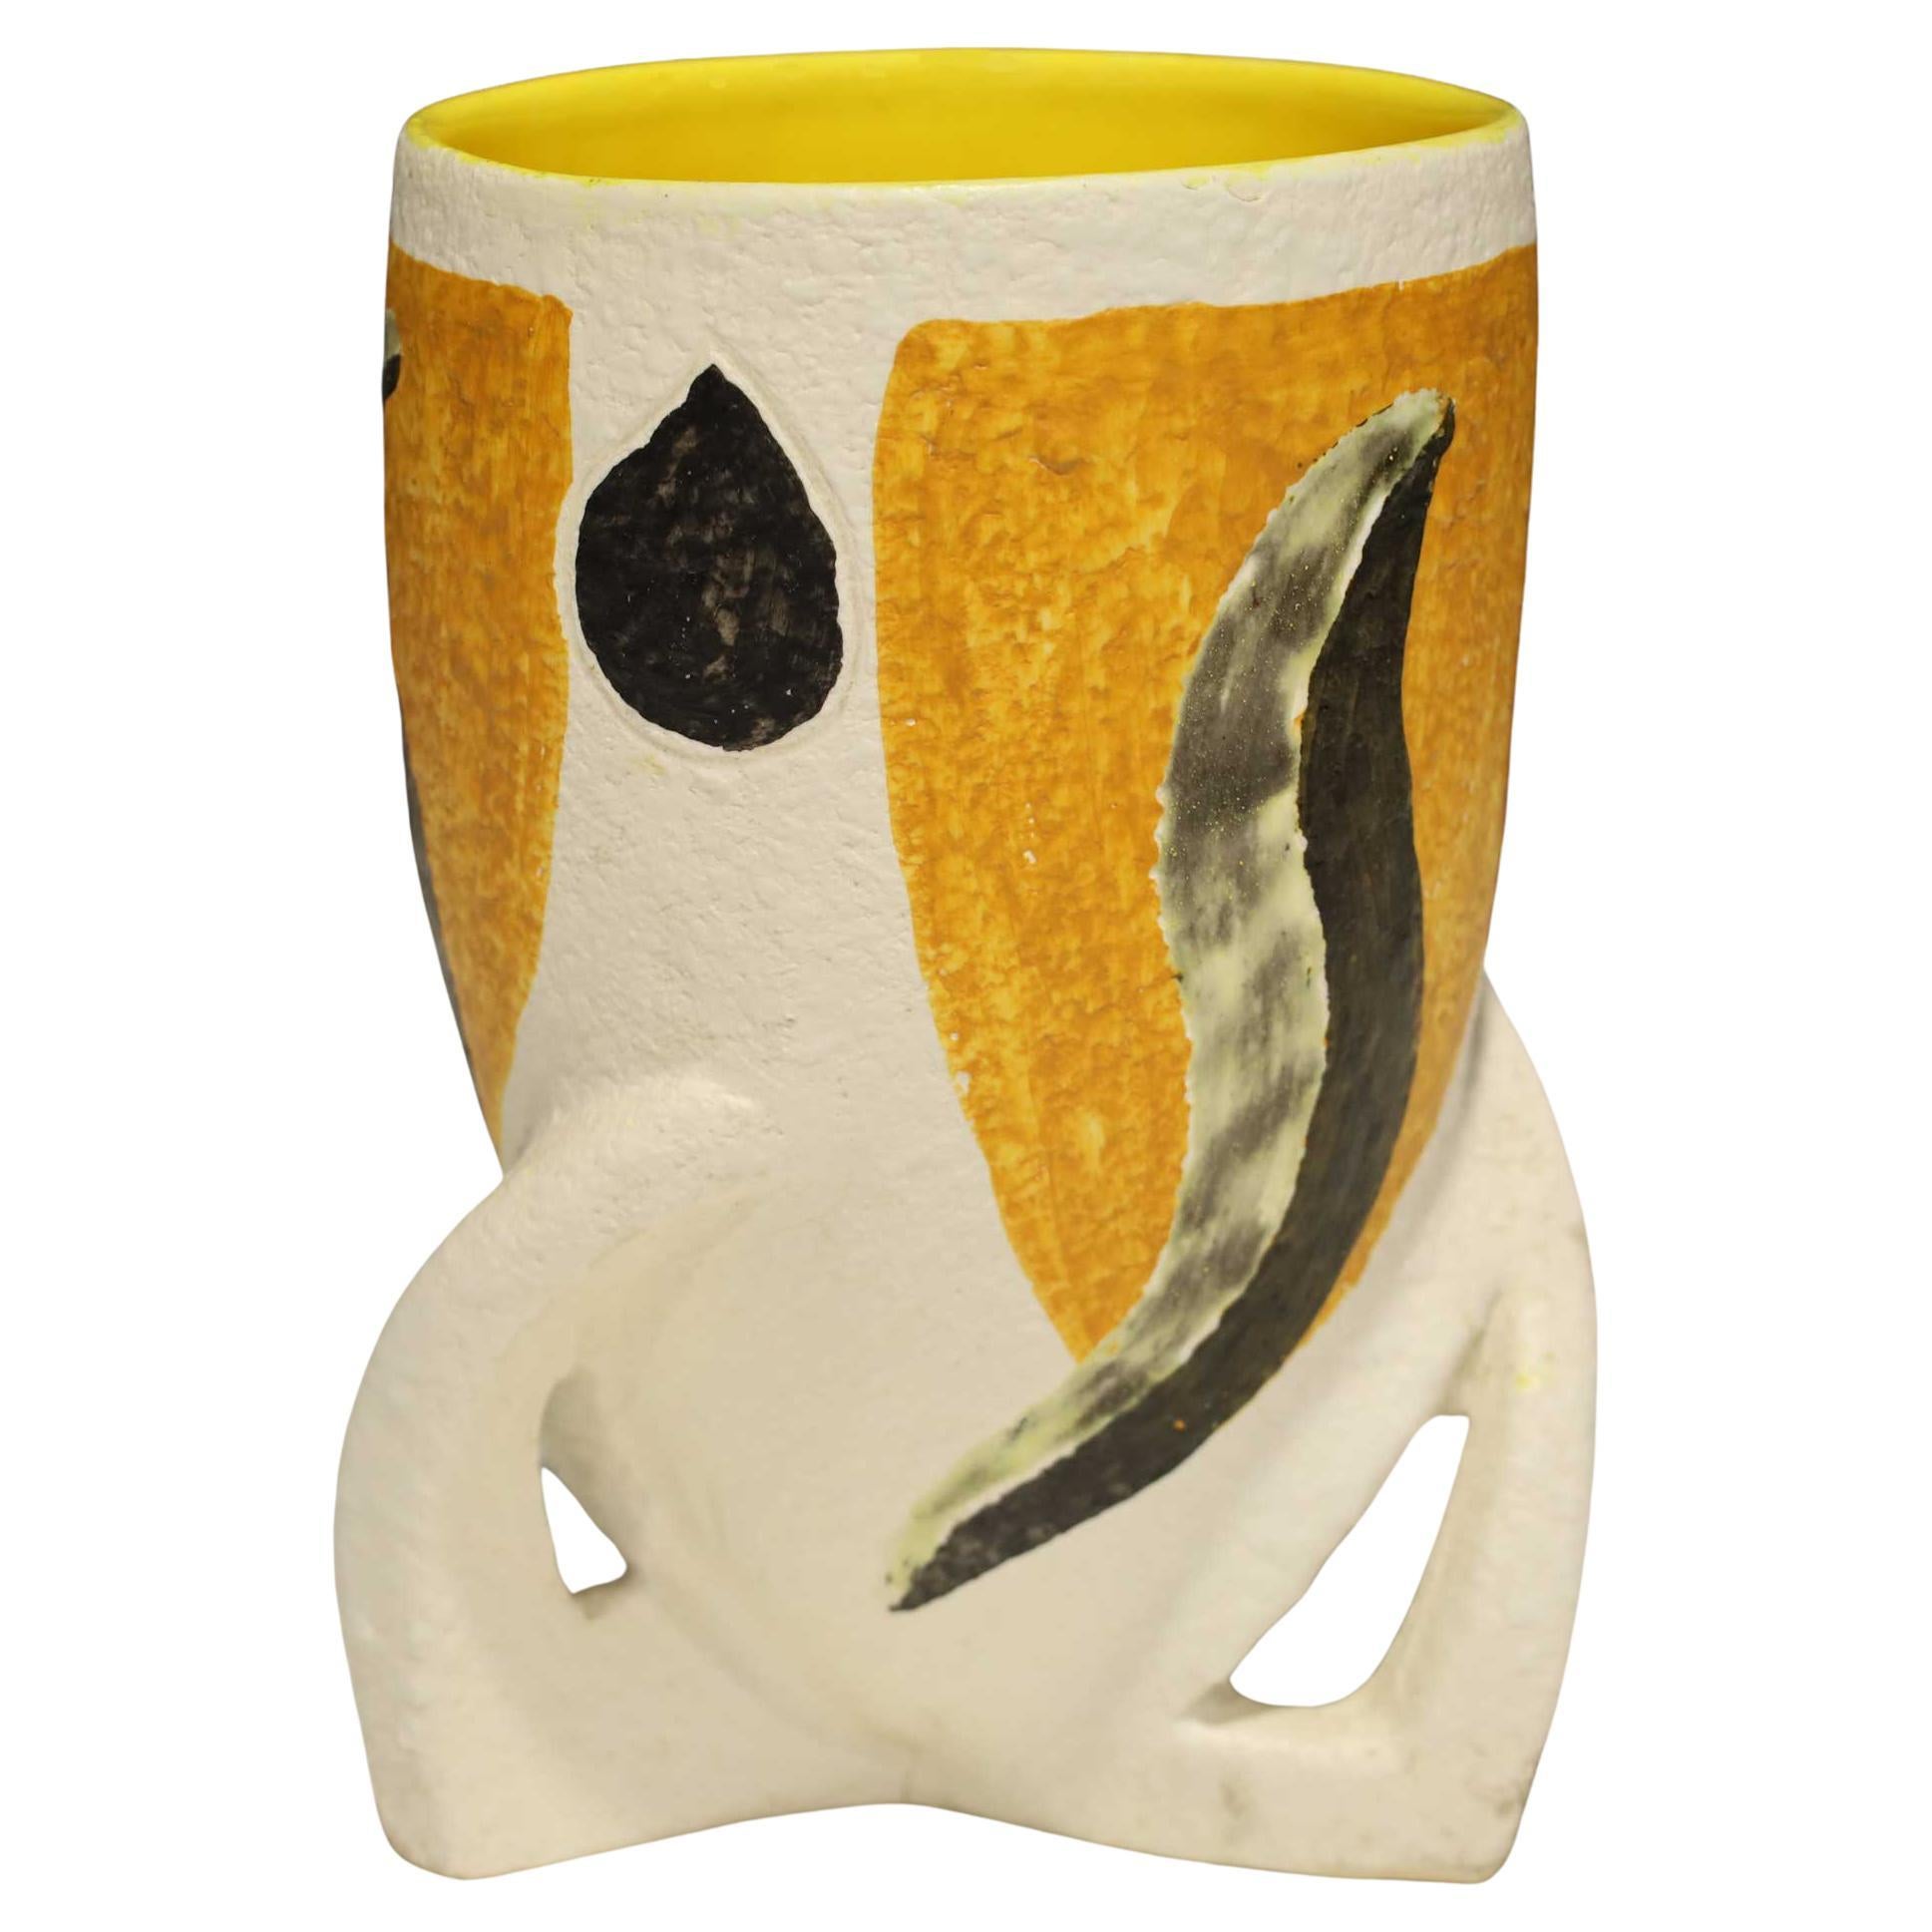 Giacomo Balla Attributed Vase in Yellow, Black and White For Sale